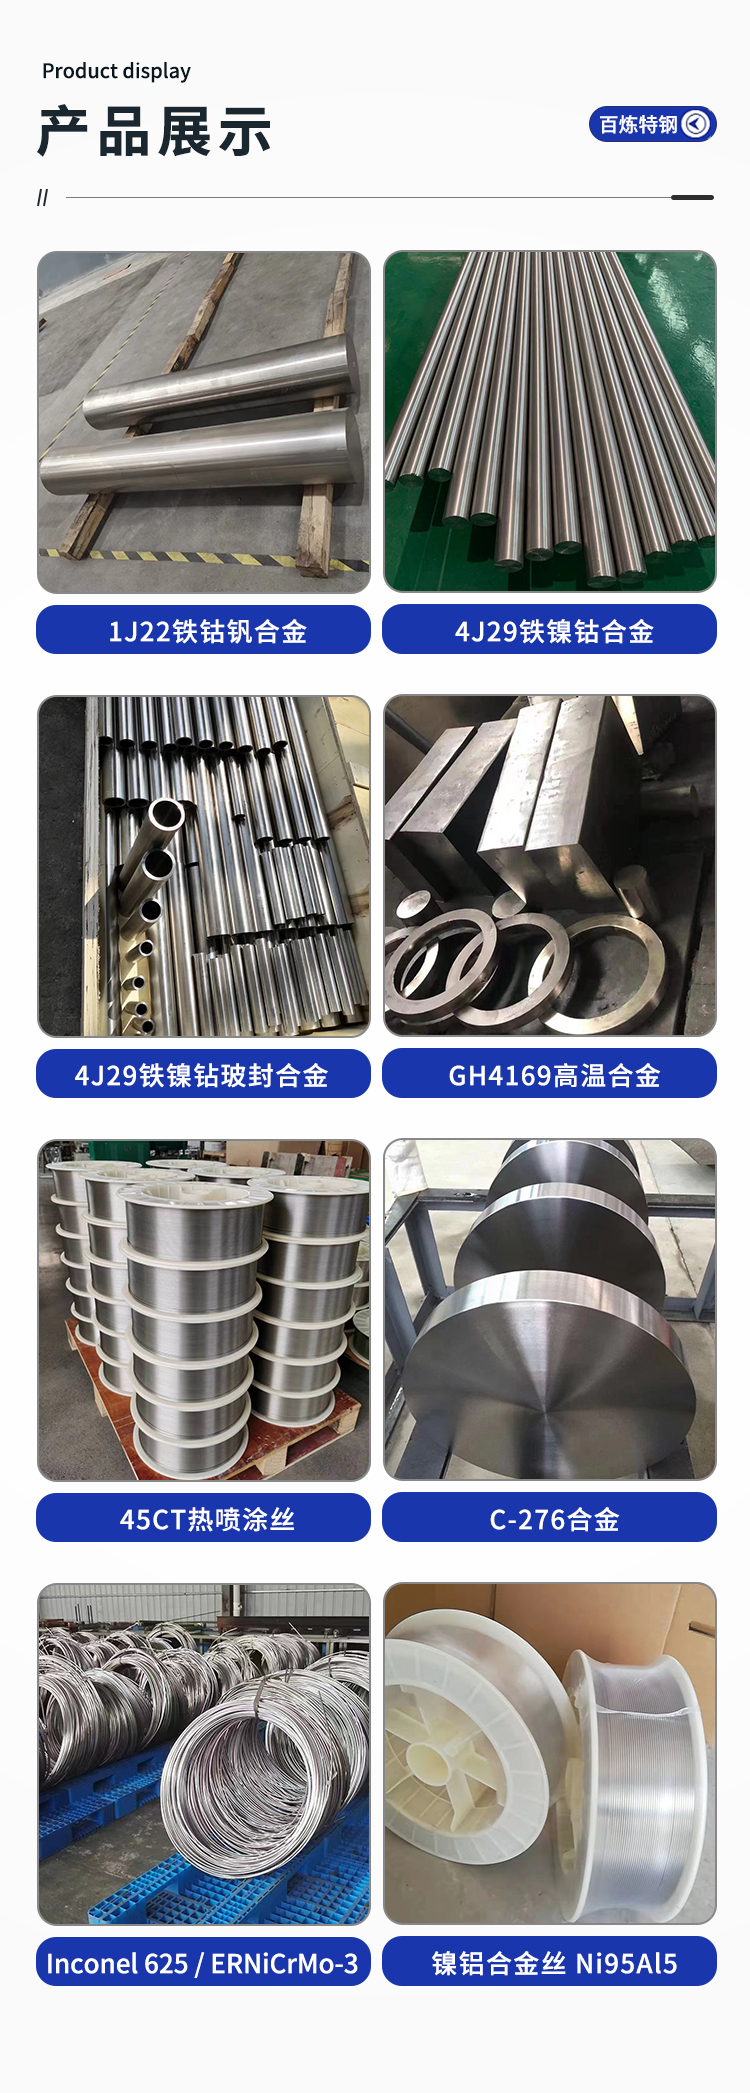 Kovar alloy seamless capillary tube with metallic luster, no oxidation, no hydrogenation, no discoloration, and no burrs